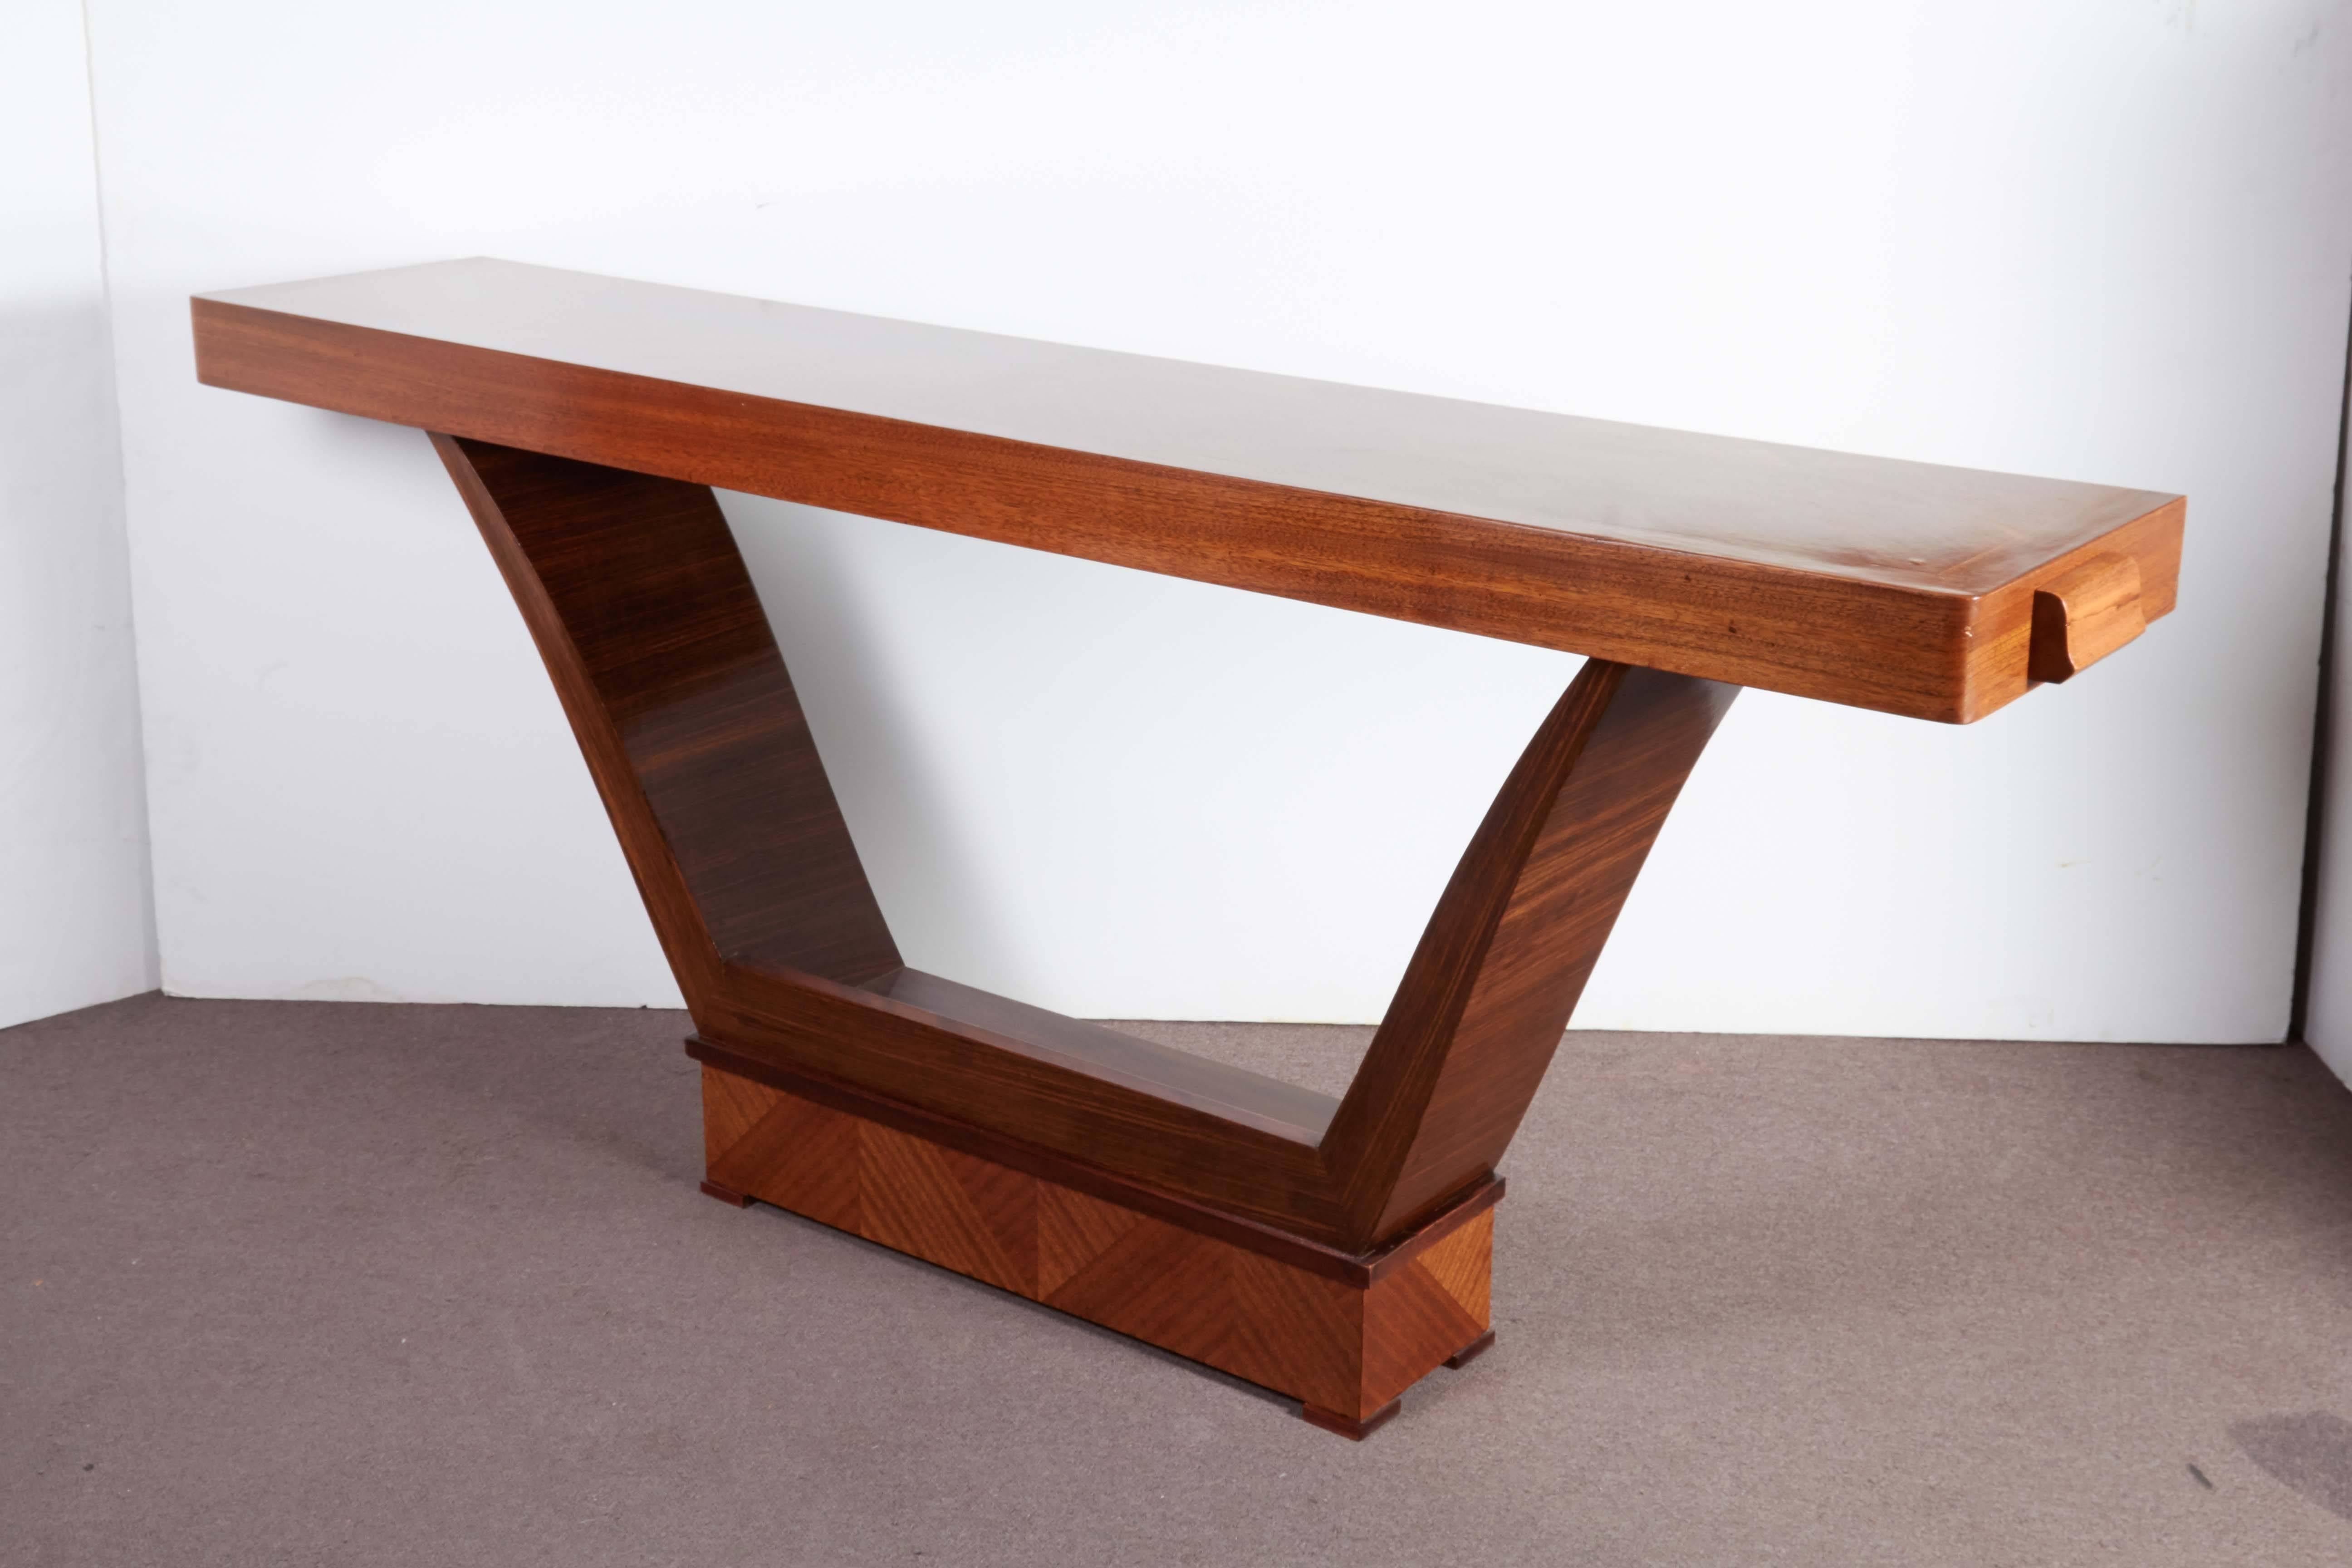 An elegant French moderne parquetry inlaid mahogany console of cubist design. Paquebot style in a semi-gloss satin lacquer finish with tapered, angular U-shaped palisander legs resting on a rectangular plinth with parquetry details. The top matches